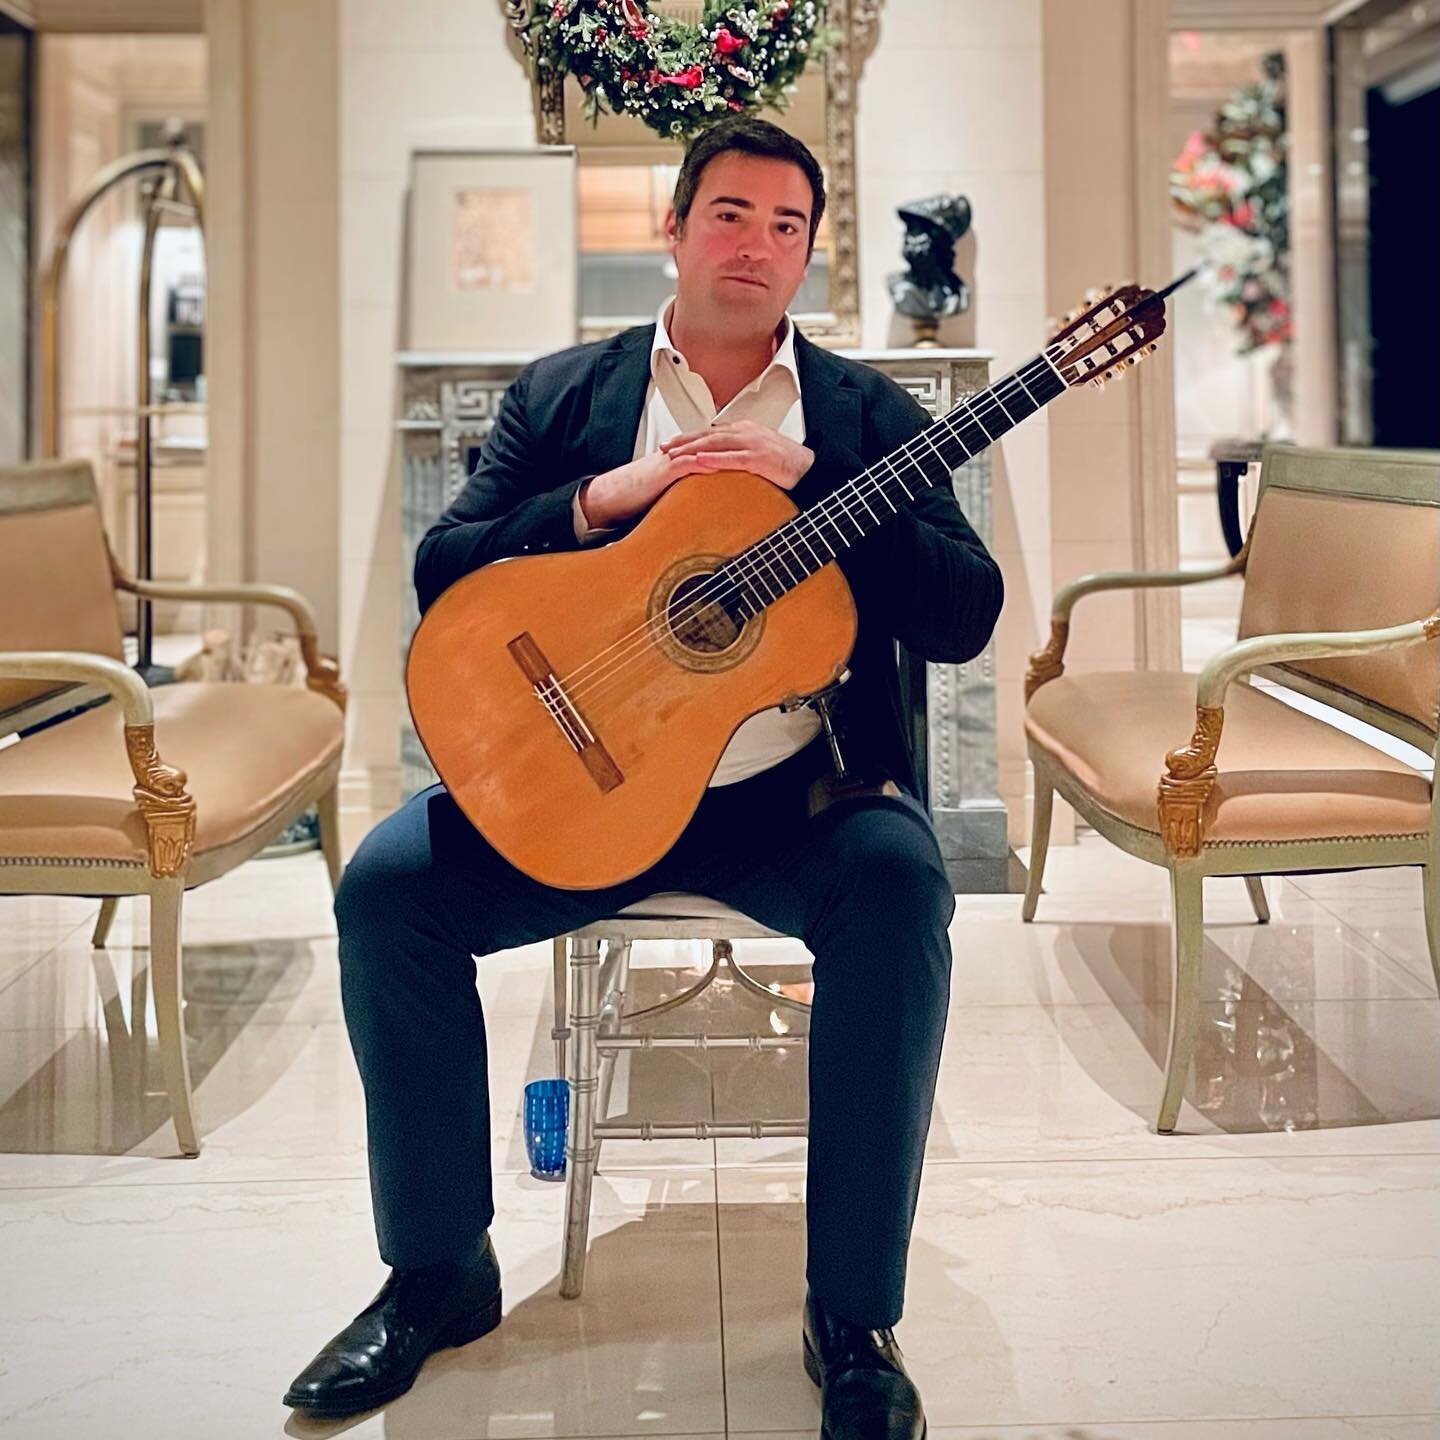 @thelowellhotel of the Upper East Side of New York was the setting for a lovely event at noon today. 

@stormy_barry and I had some killer indian food and got to visit @jonathansolarsfineviolins 

#guitarist #guitar #musician #luxury #hotel #nyc #gig